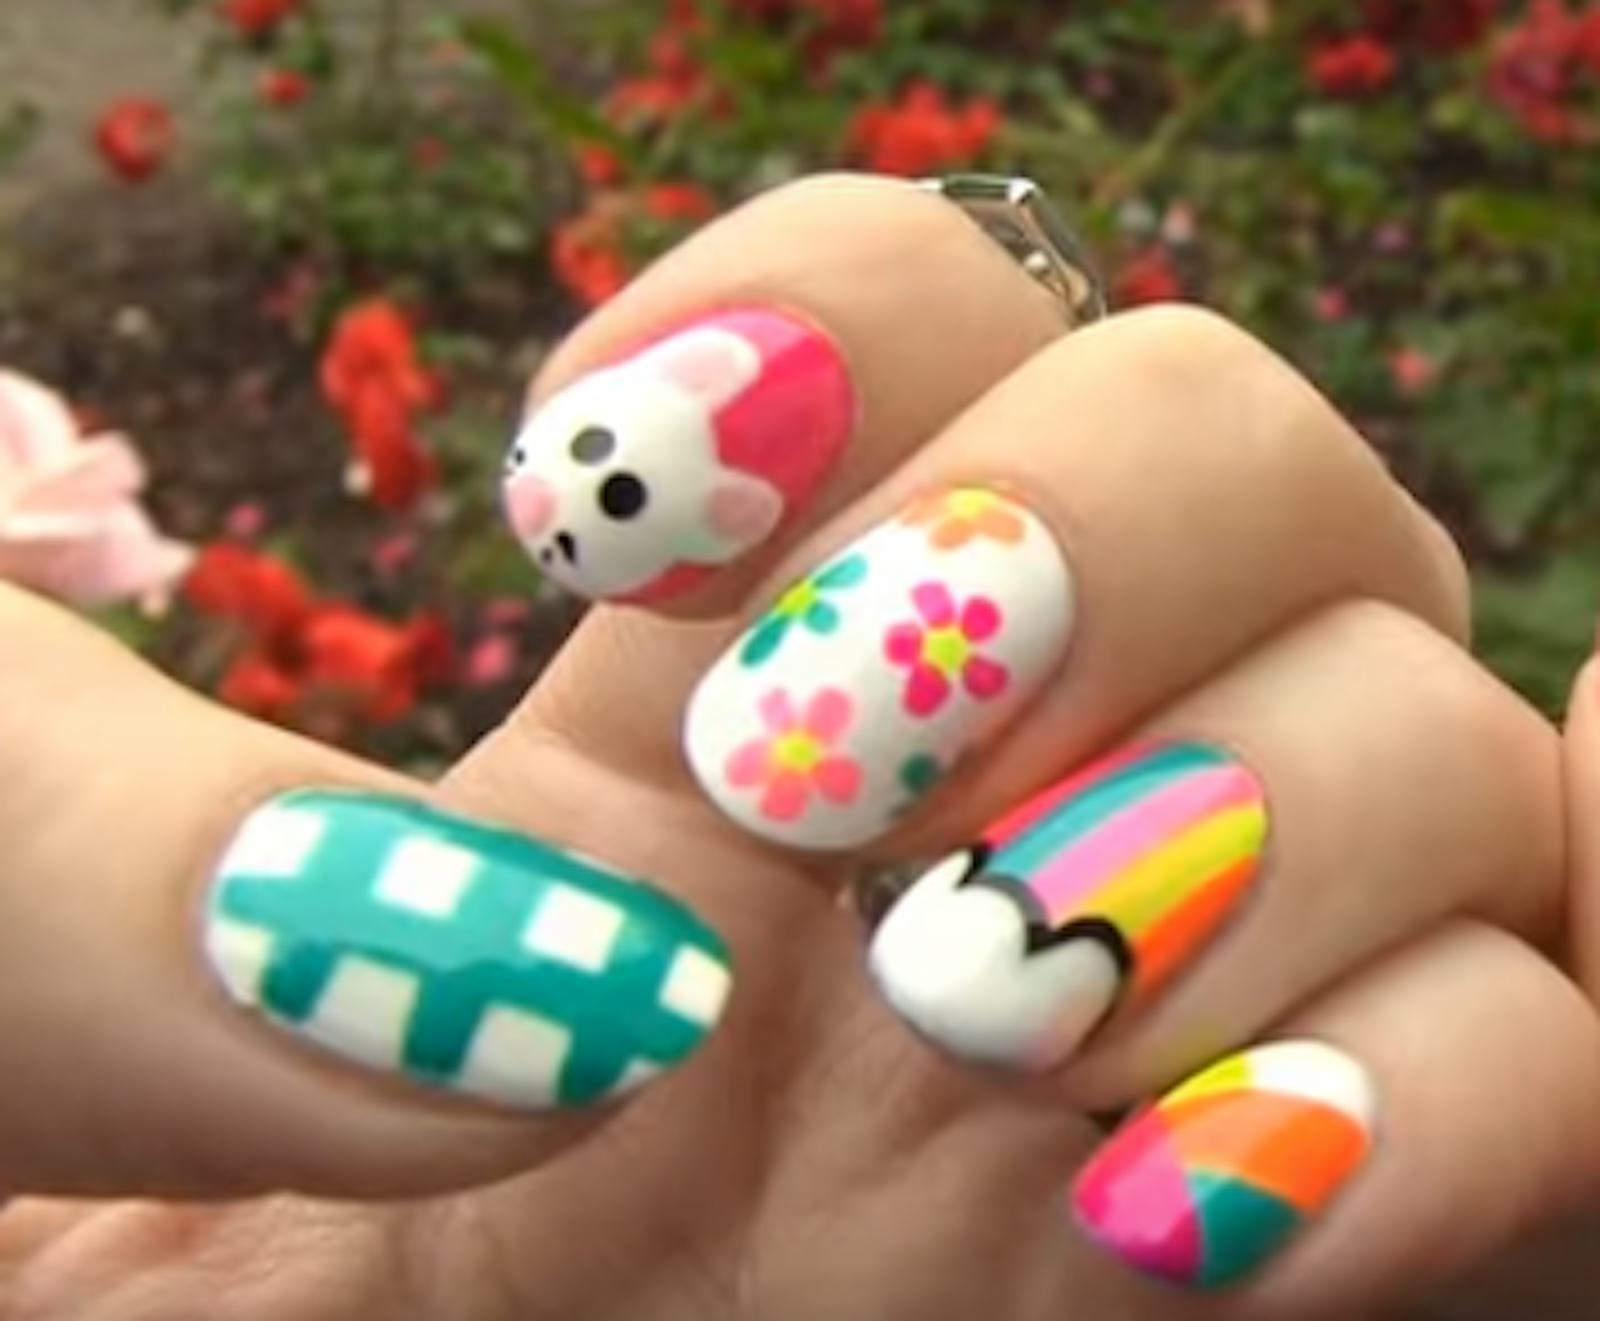 8. "Nail Art Techniques for Tricky Designs" - wide 3